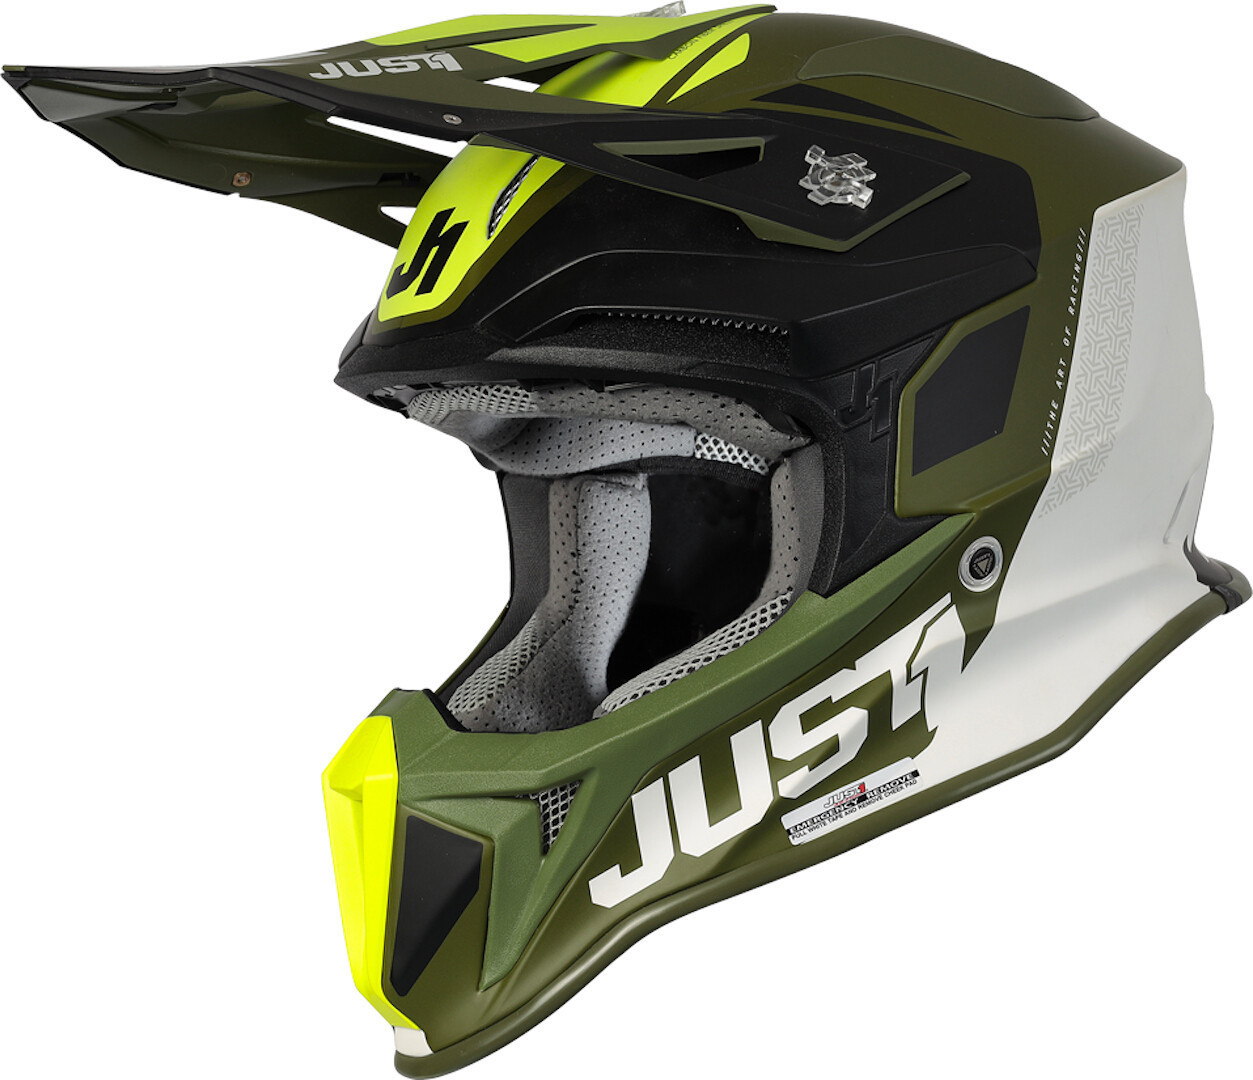 Image of Just1 J18 Pulsar Army Limited Edition Casco motocross, nero-bianco-verde, dimensione XL